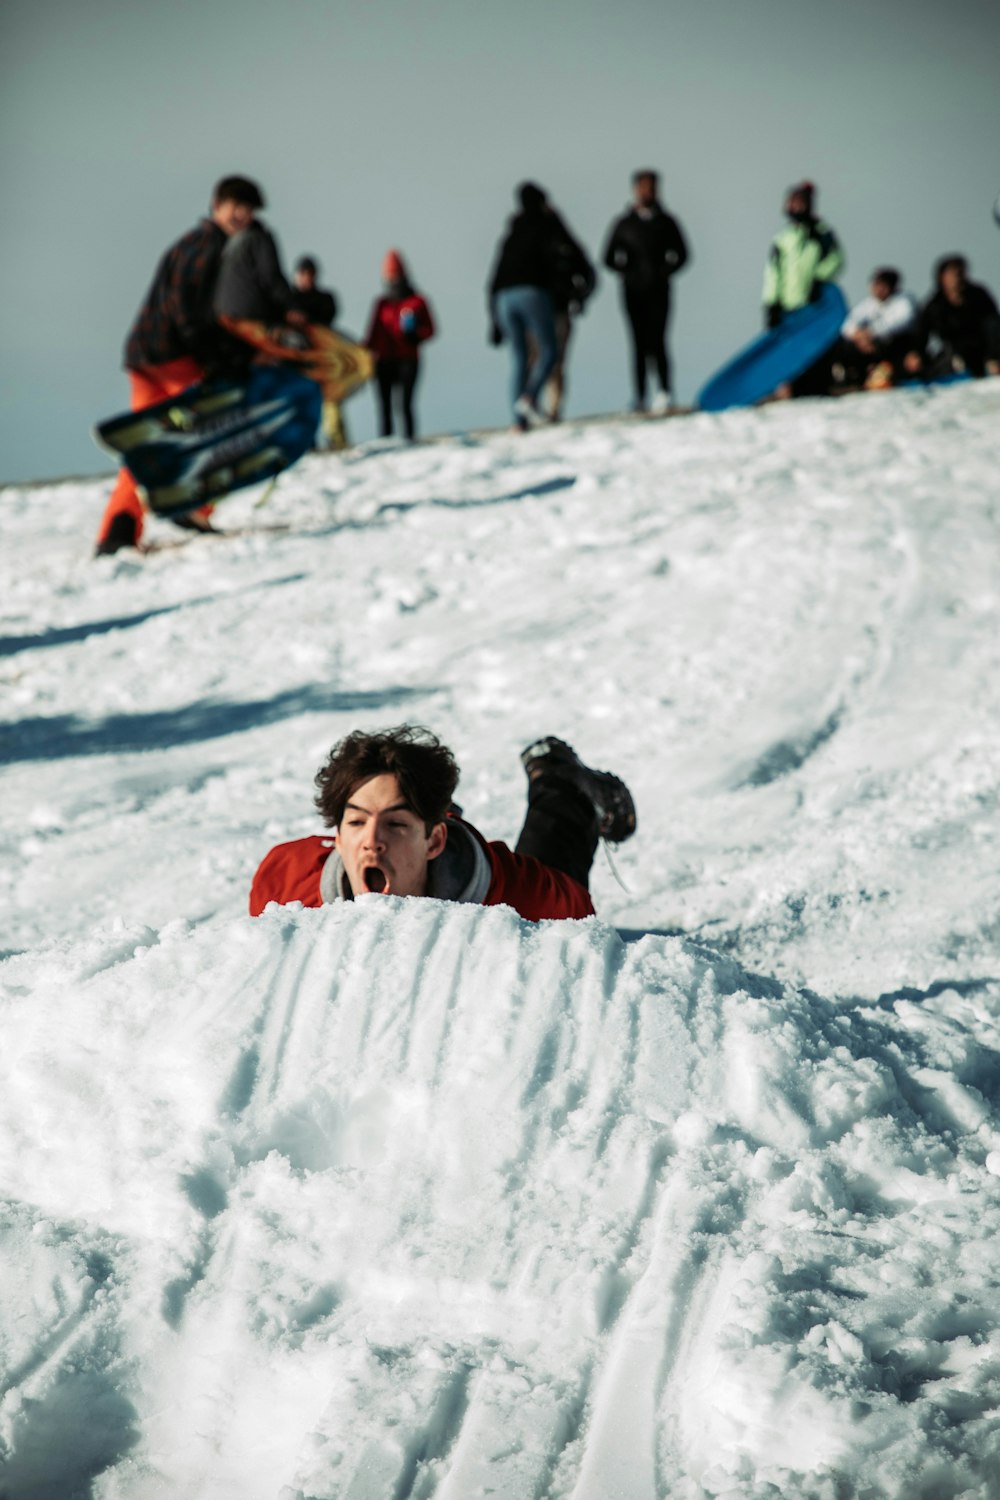 a person laying in the snow in front of a group of people